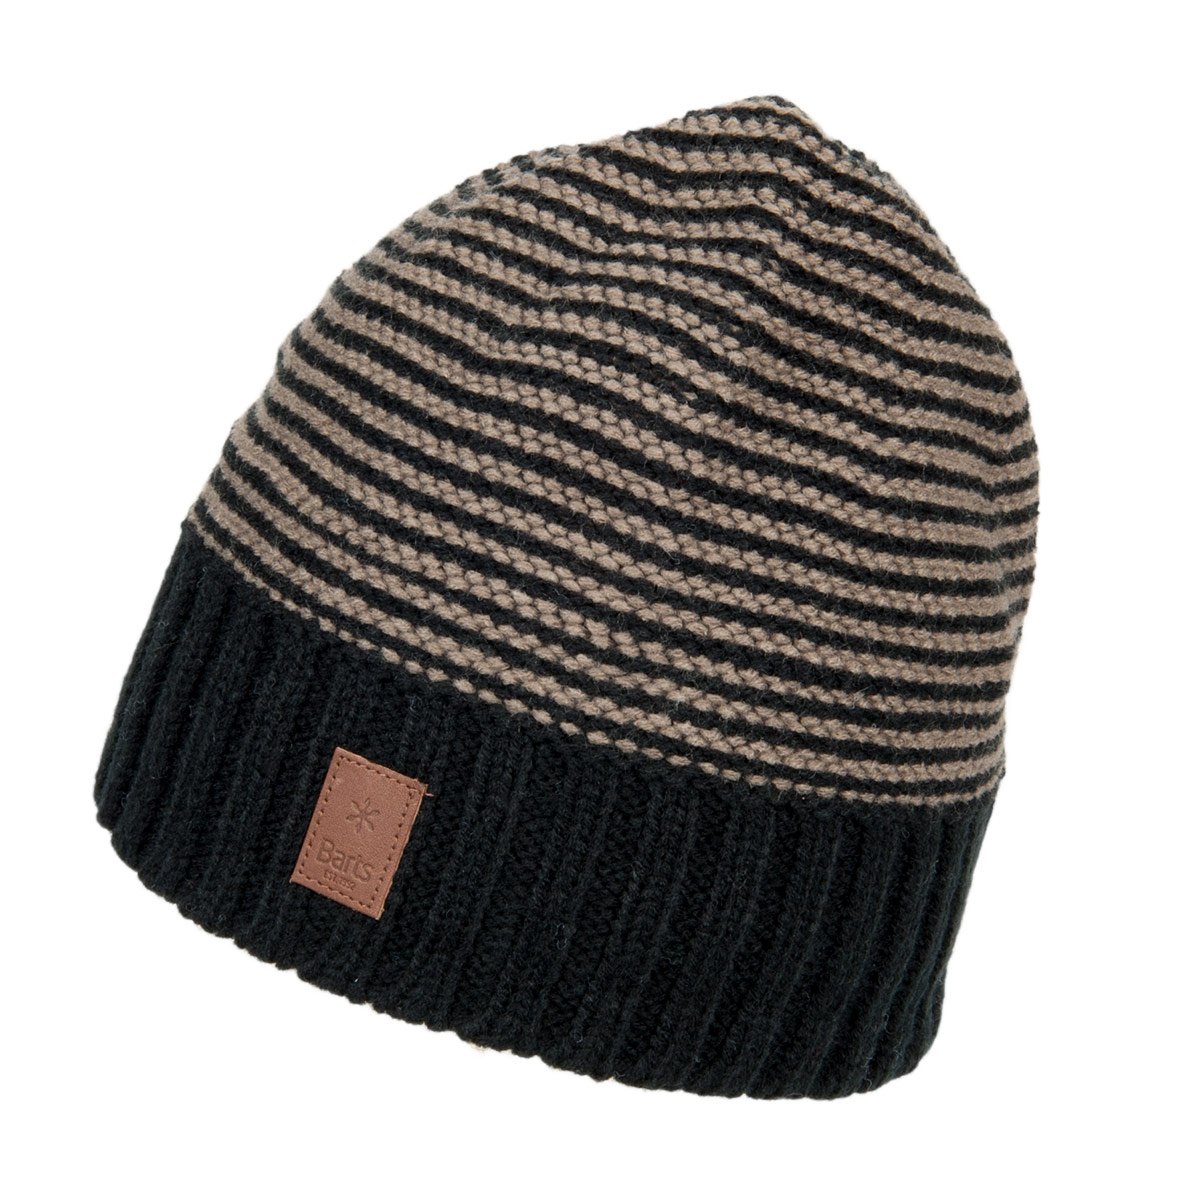 BARTS simple cap with lining in pile